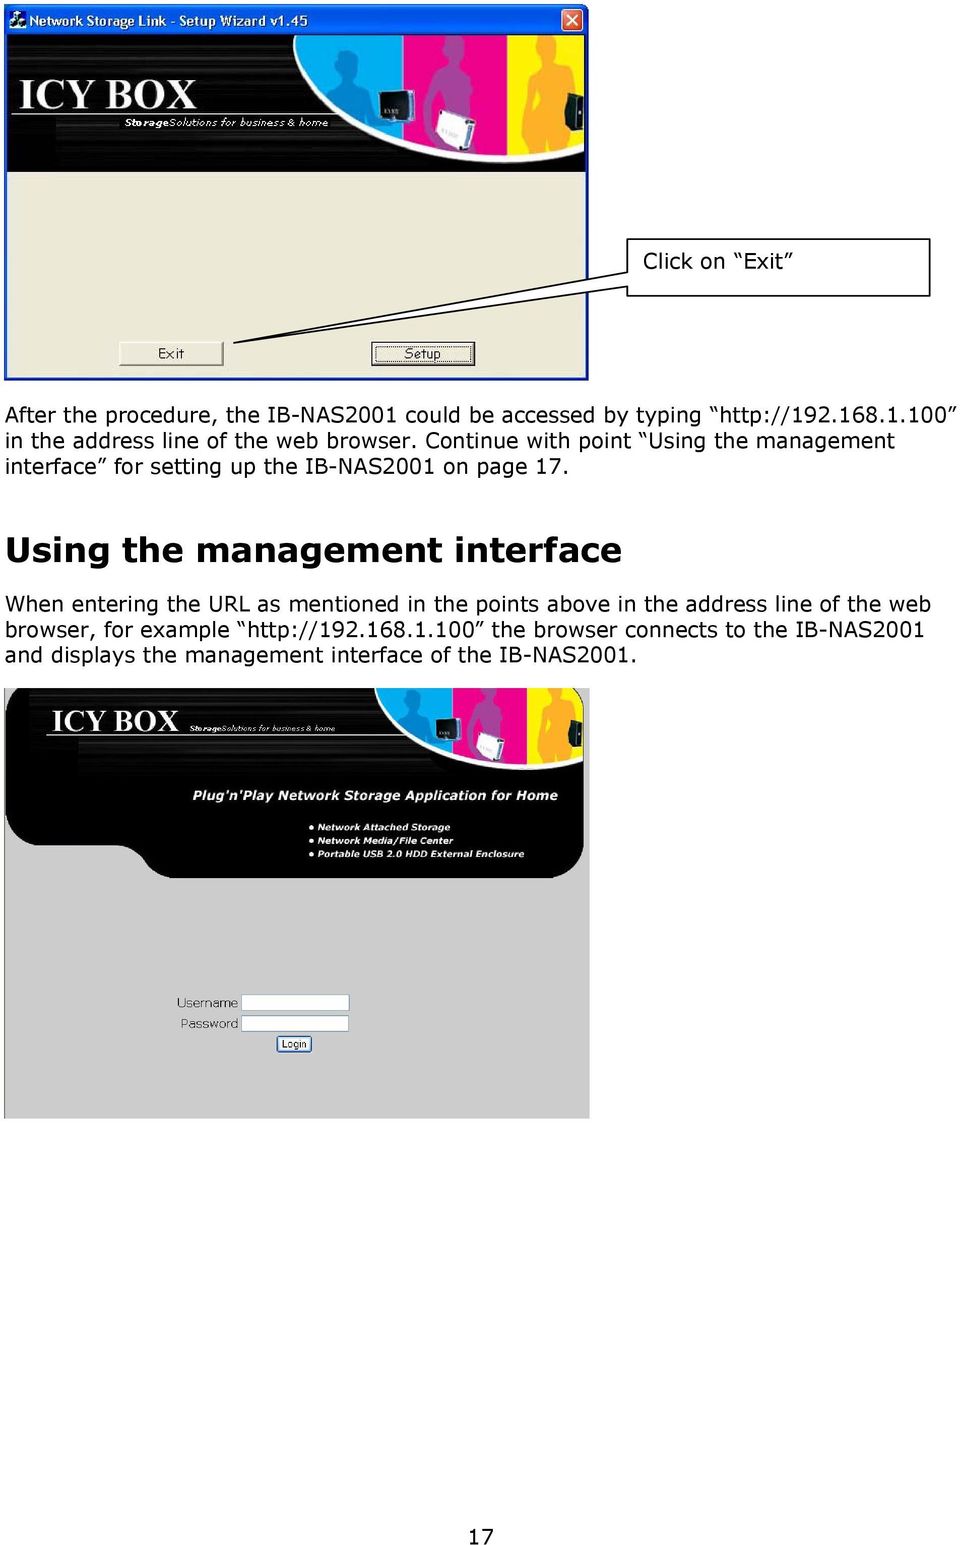 Using the management interface When entering the URL as mentioned in the points above in the address line of the web